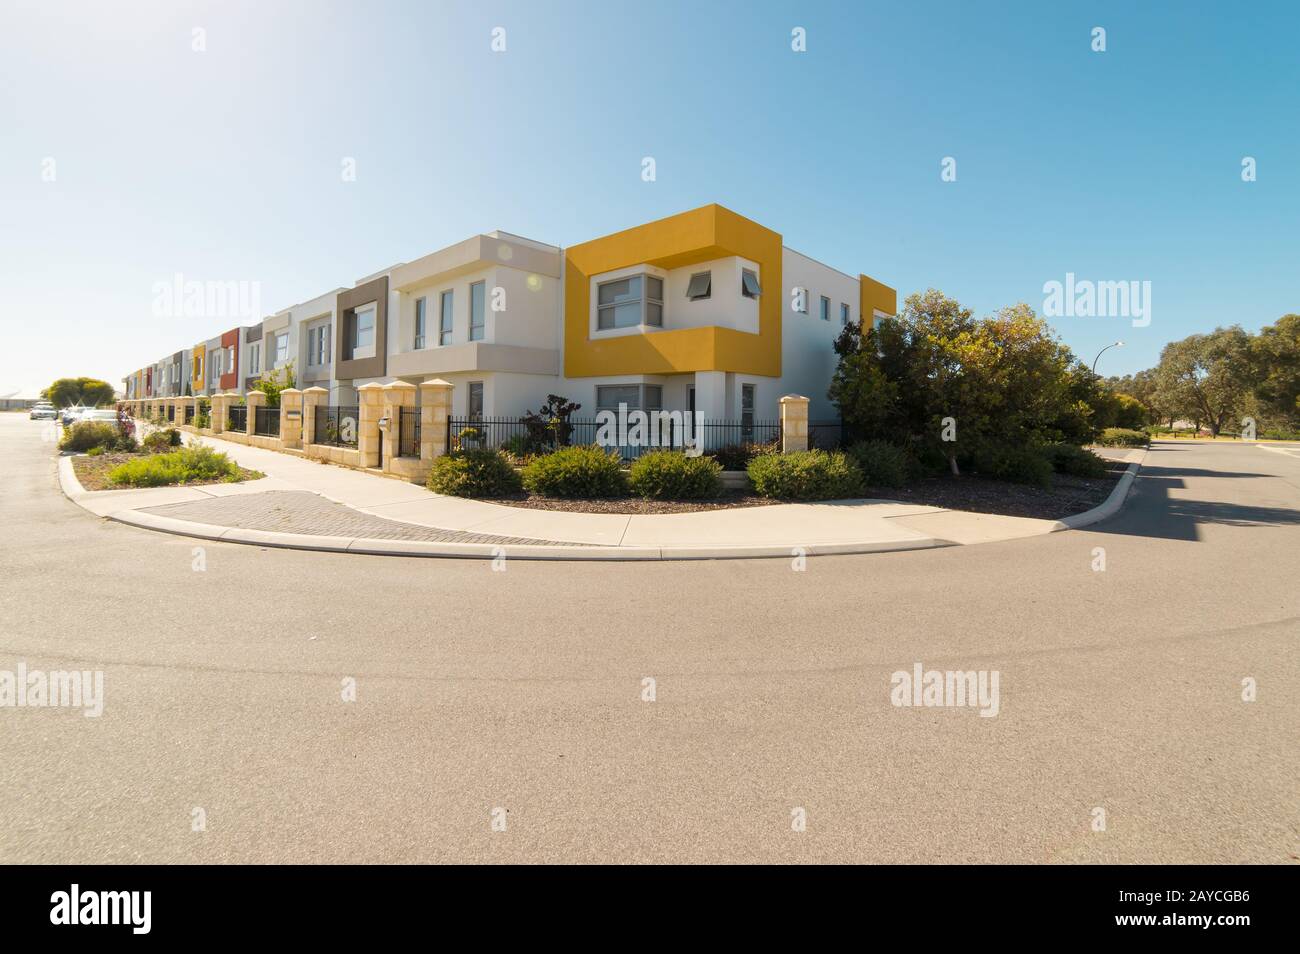 Asphalt road with modern terrace house in front on blue sky background. Yanchep Beach Town Stock Photo